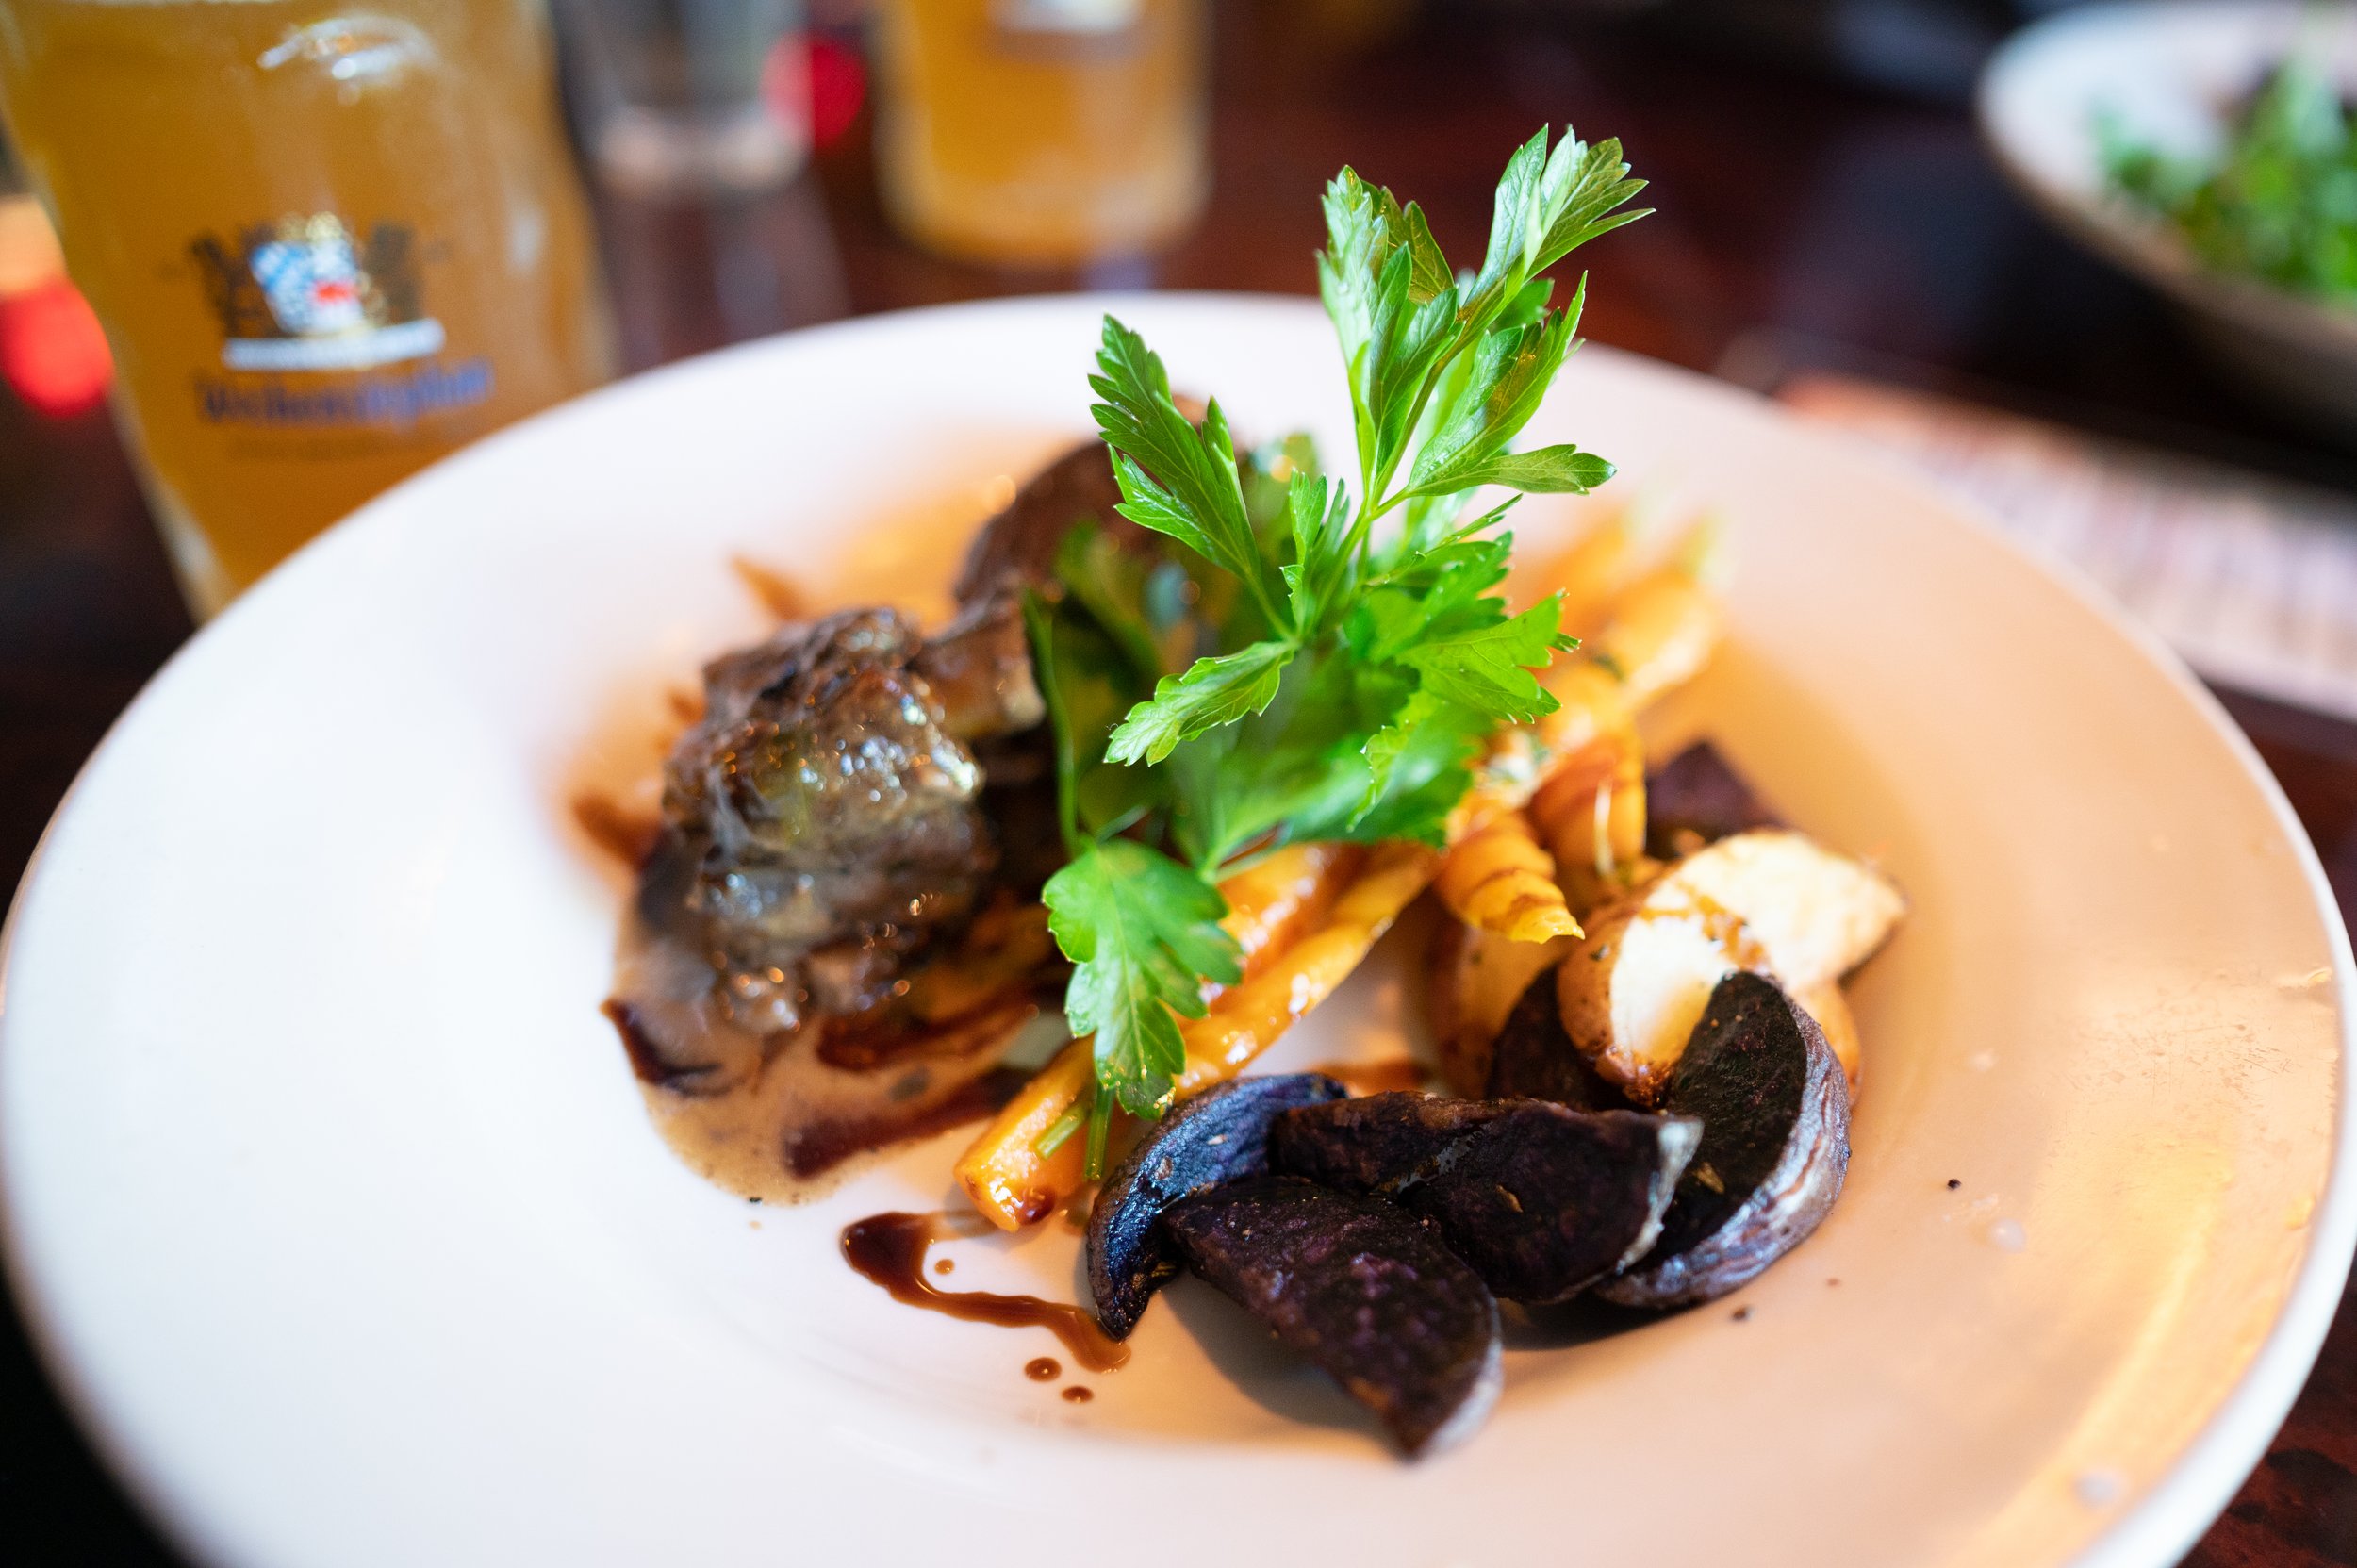 Braised short ribs with Bowman Farm root vegetables and parsley prepared by Spence and Lenon